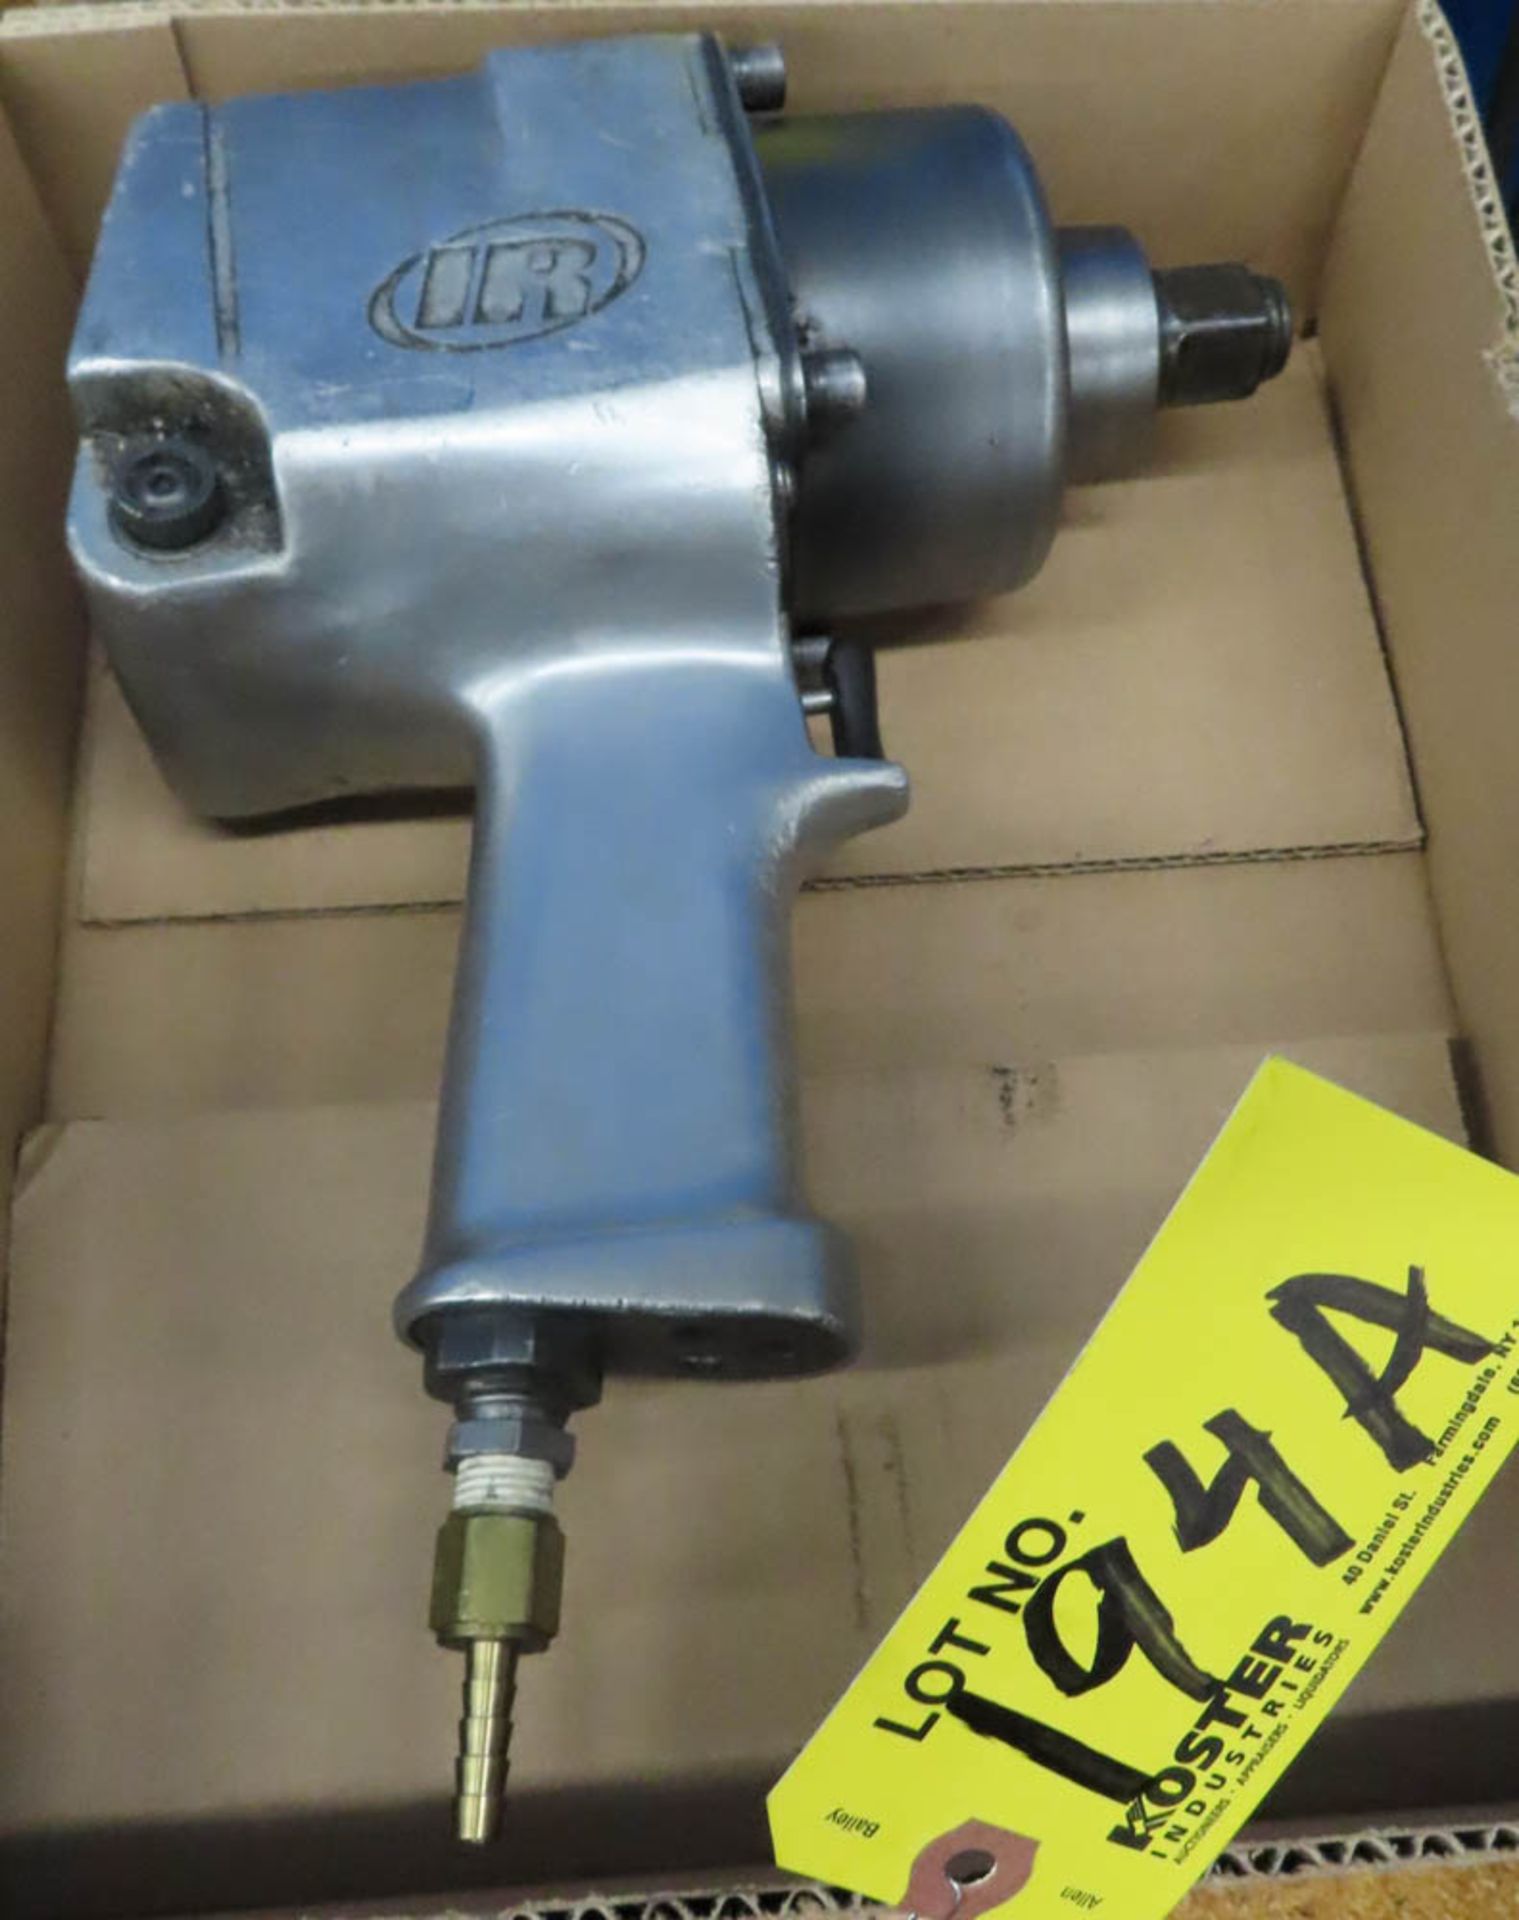 INGERSOLL RAND 3/4" PNEUMATIC IMPACT WRENCH